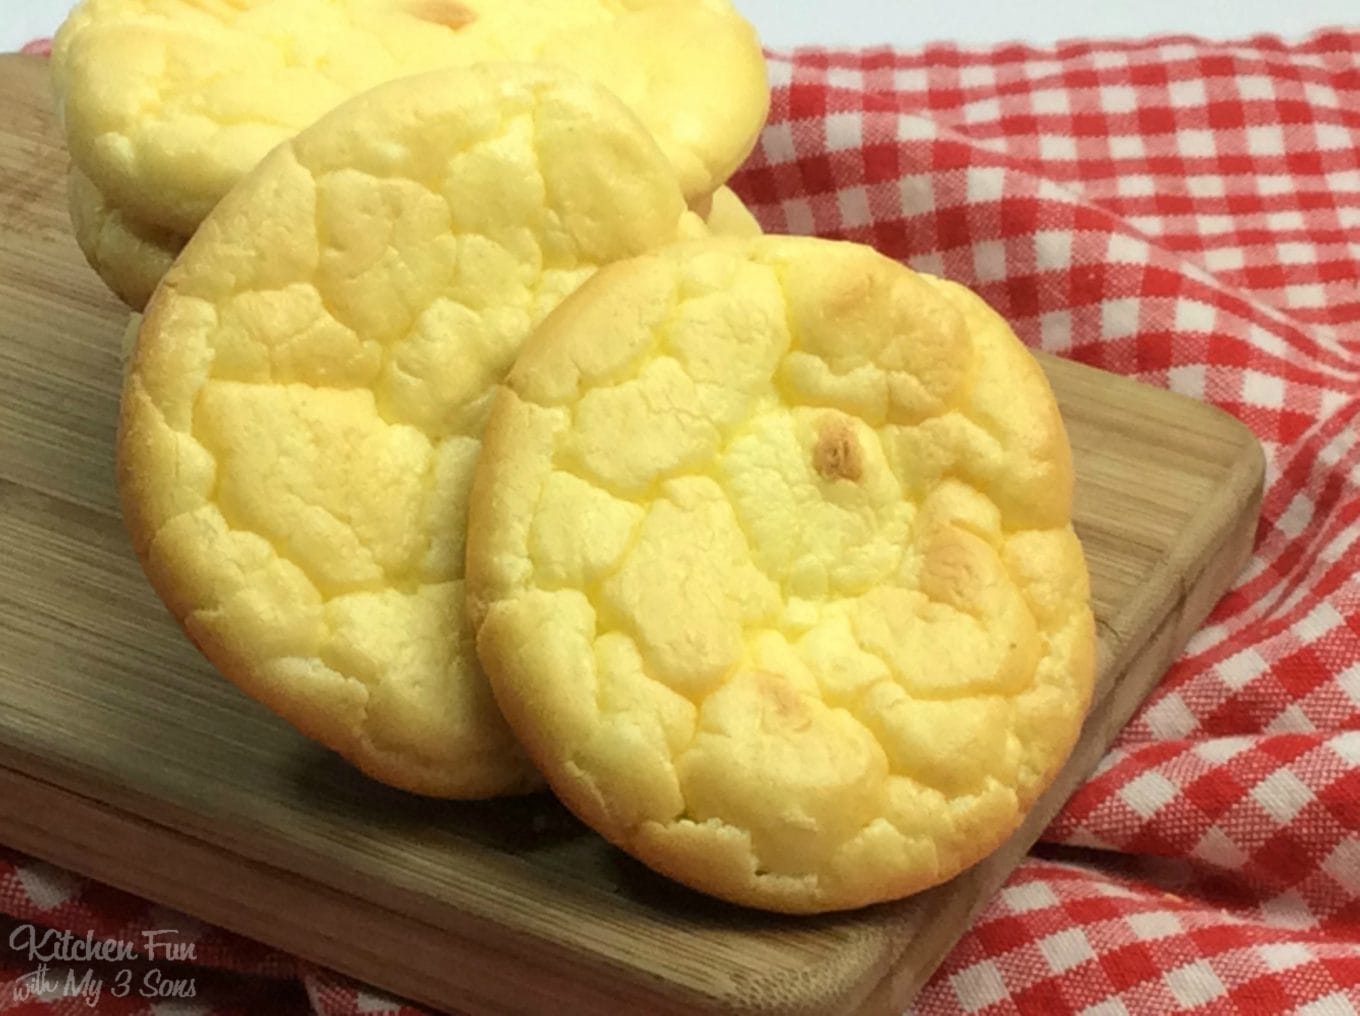 baked cloud bread rounds on a wooden cutting board